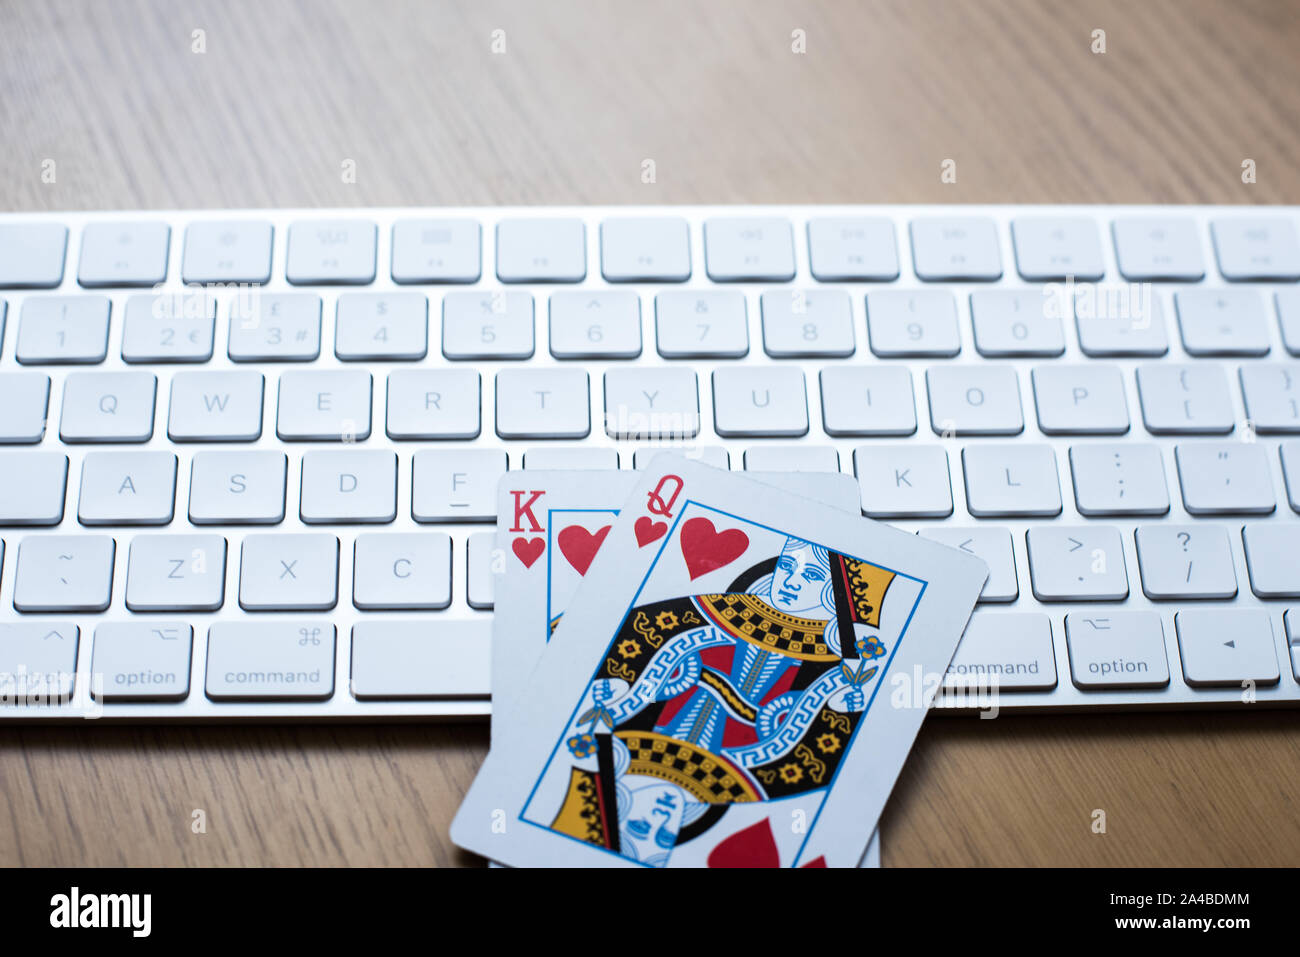 Online gambling and poker play concept with keyboard on a table with King and queen cards Stock Photo